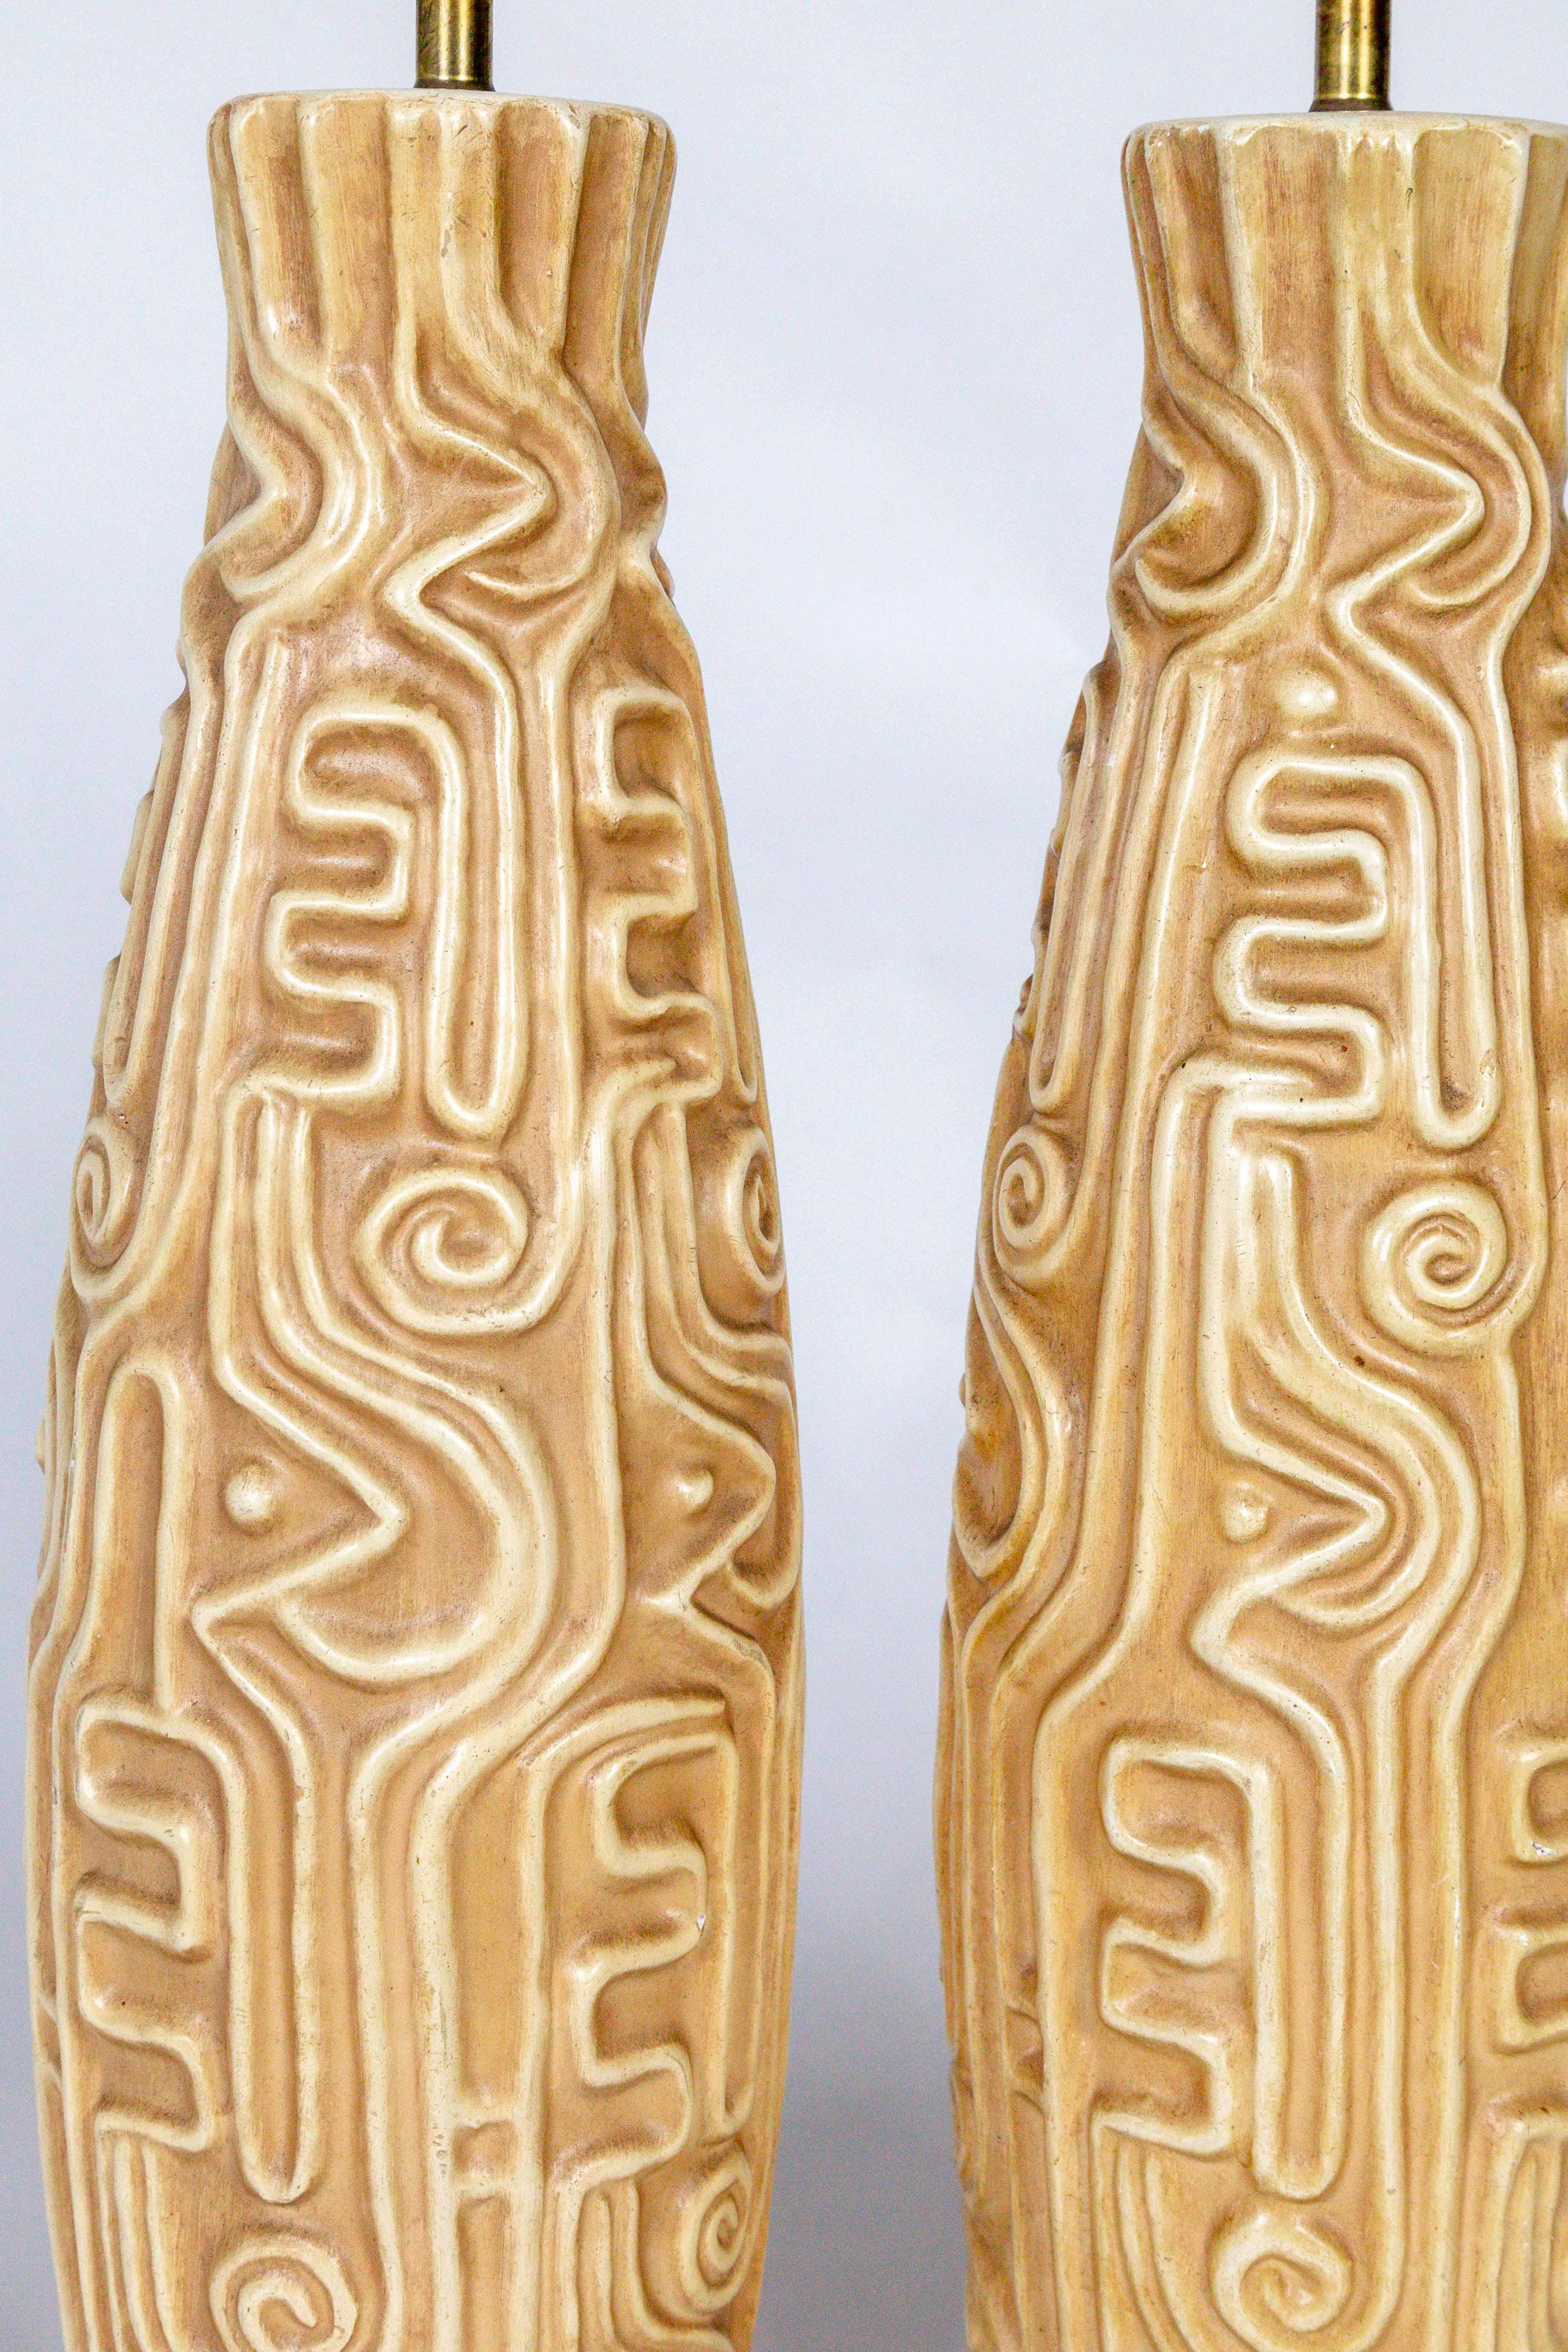 A pair of midcentury, American pottery lamps carved with high relief designs reminiscent of South American geoglyphs. Shaped tall and narrow and tapering slightly at the top in a light tan color, with a wooden base in a mahogany shade. With brass